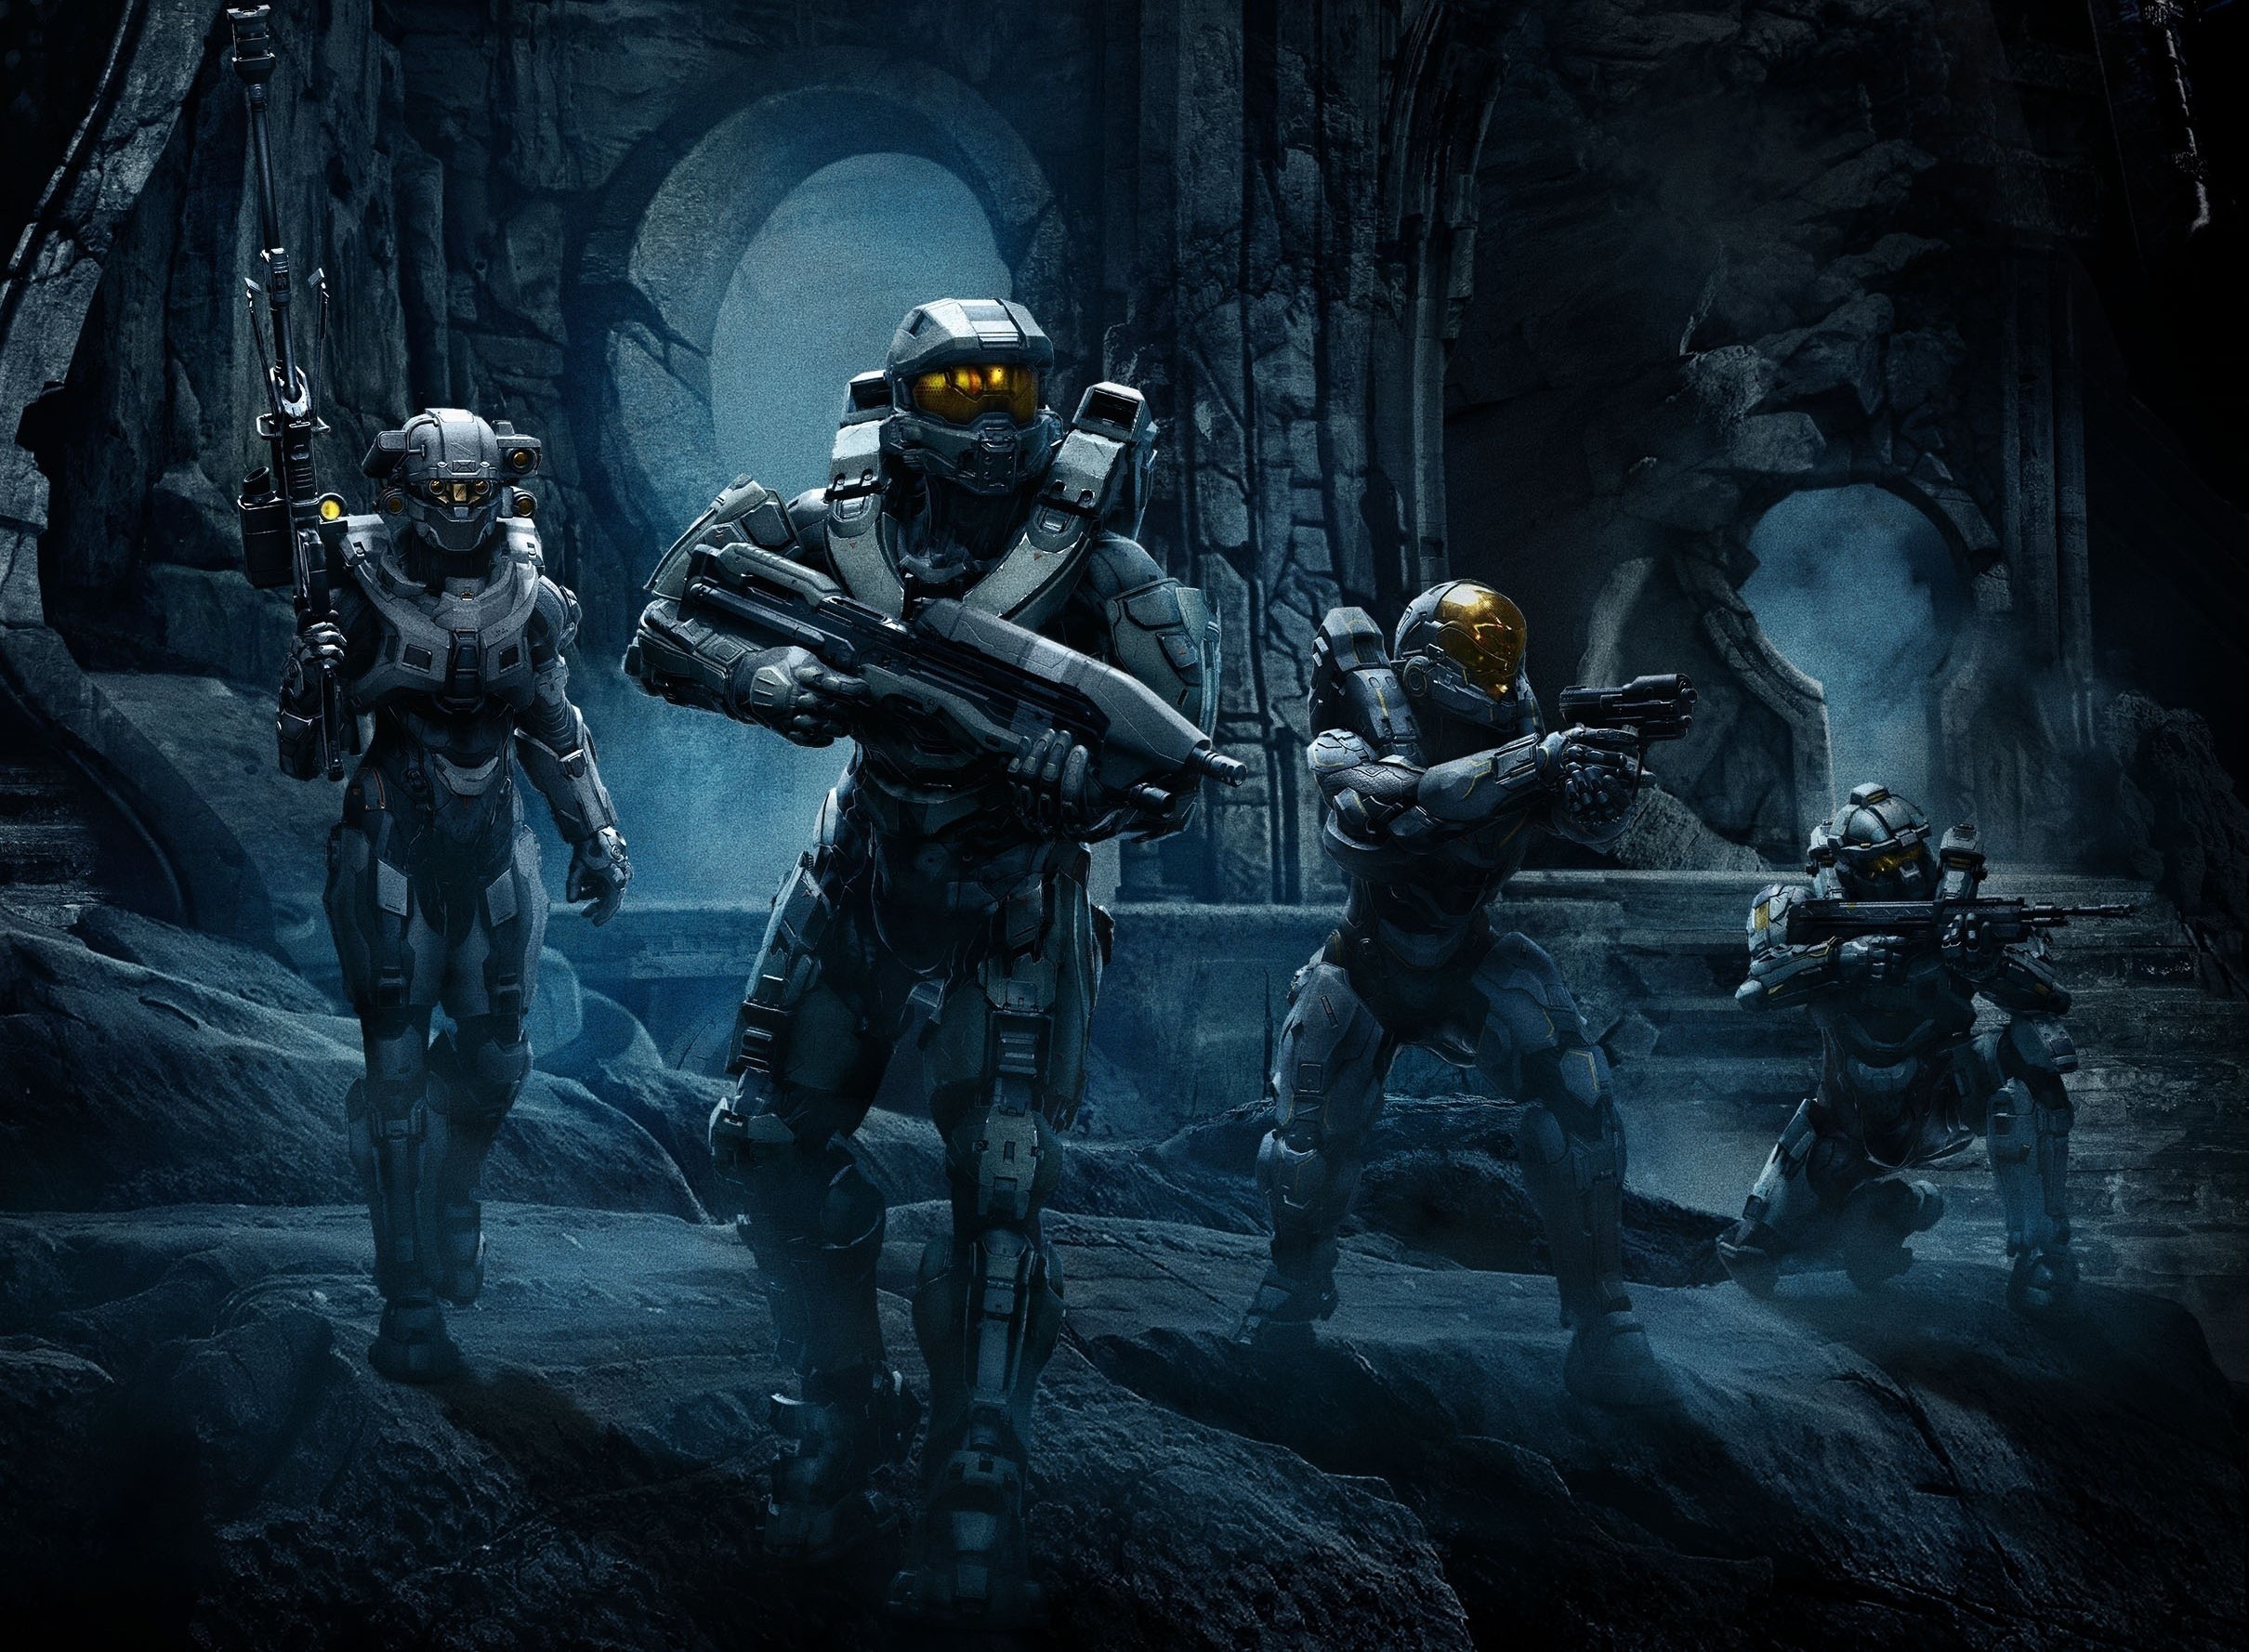 Halo 5 Halo Shooter Video Games Master Chief Blue Team Kelly 087 Fred 104 Linda 058 Spartans Halo 2420x1778